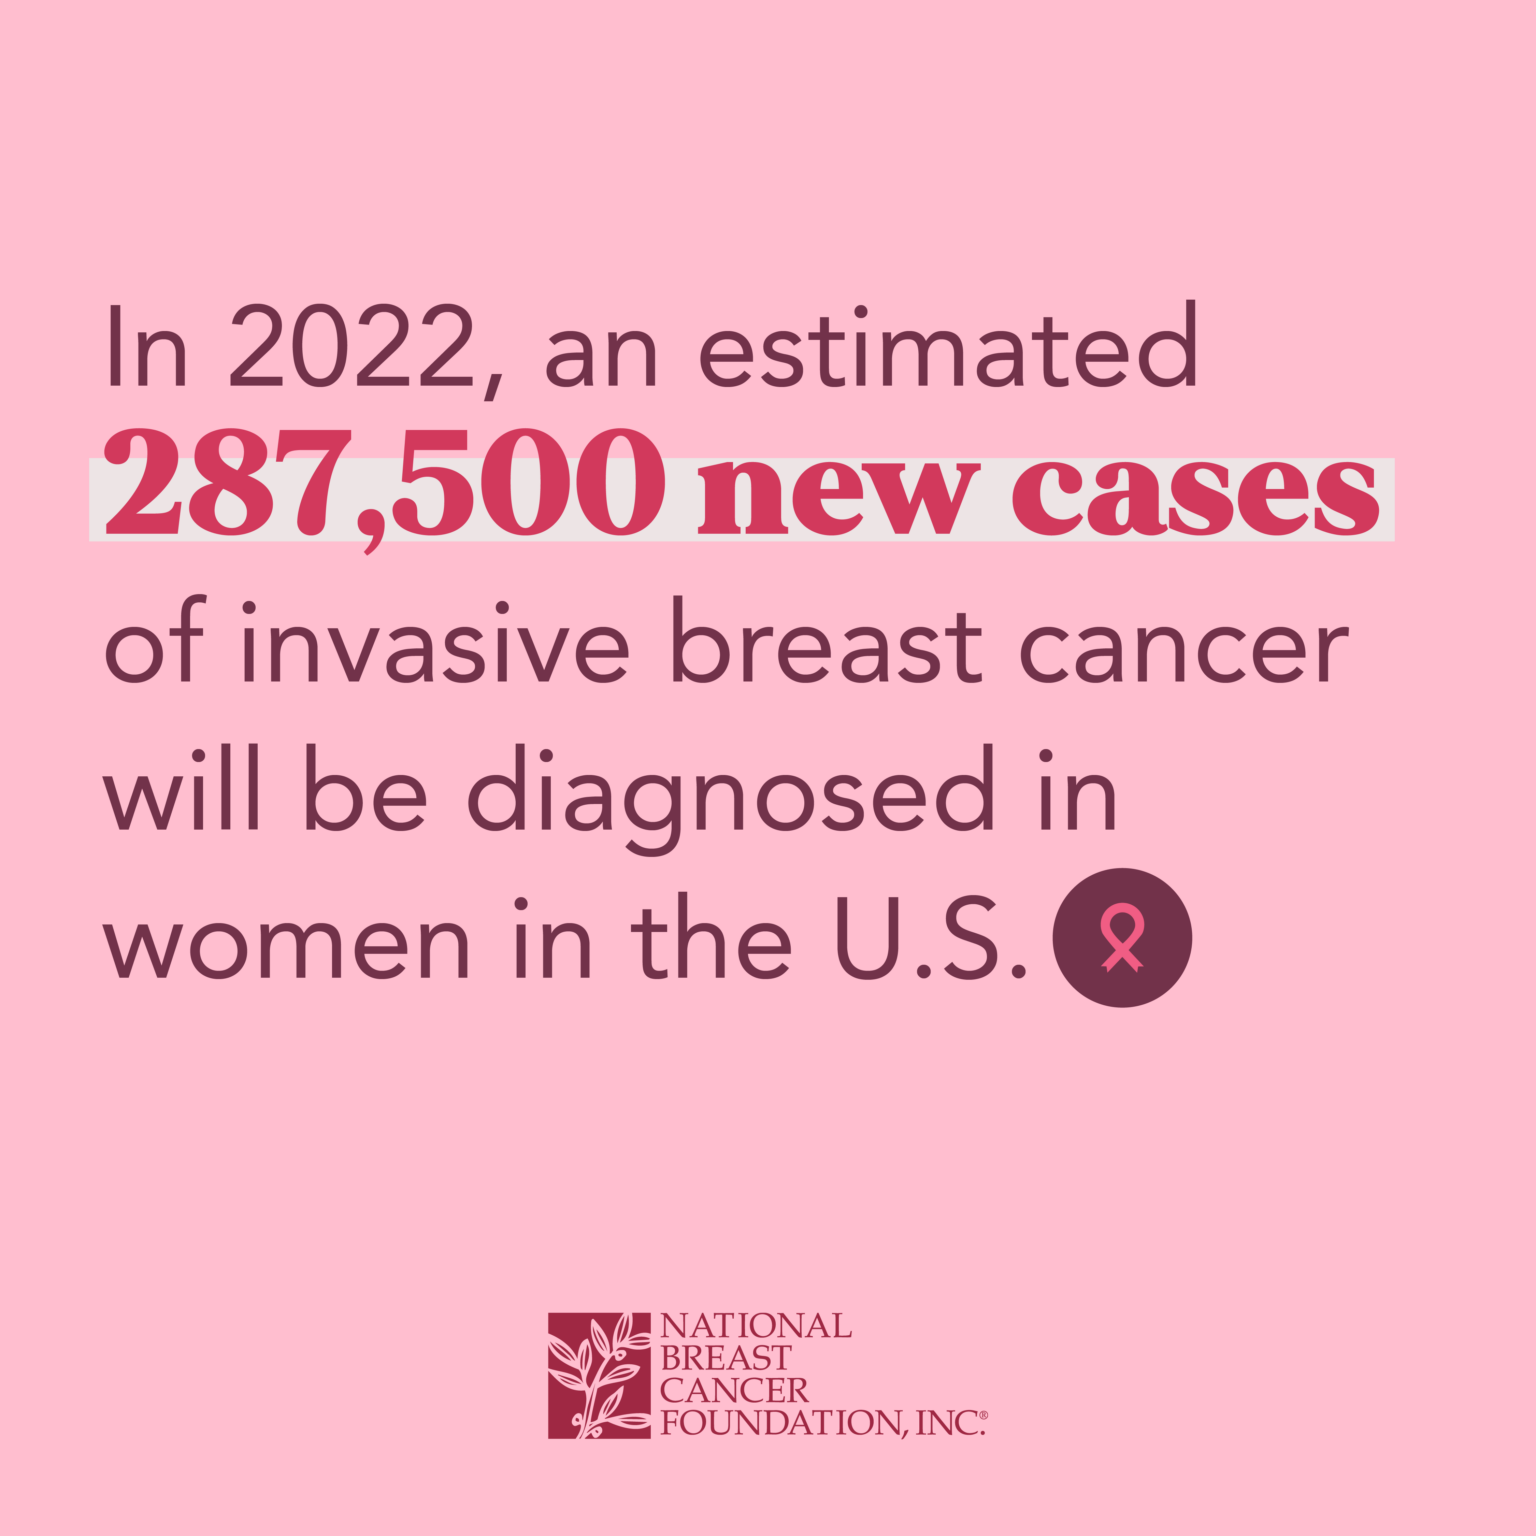 2022 Breast Cancer Stats V03 287k New Cases SQ 1536x1536 